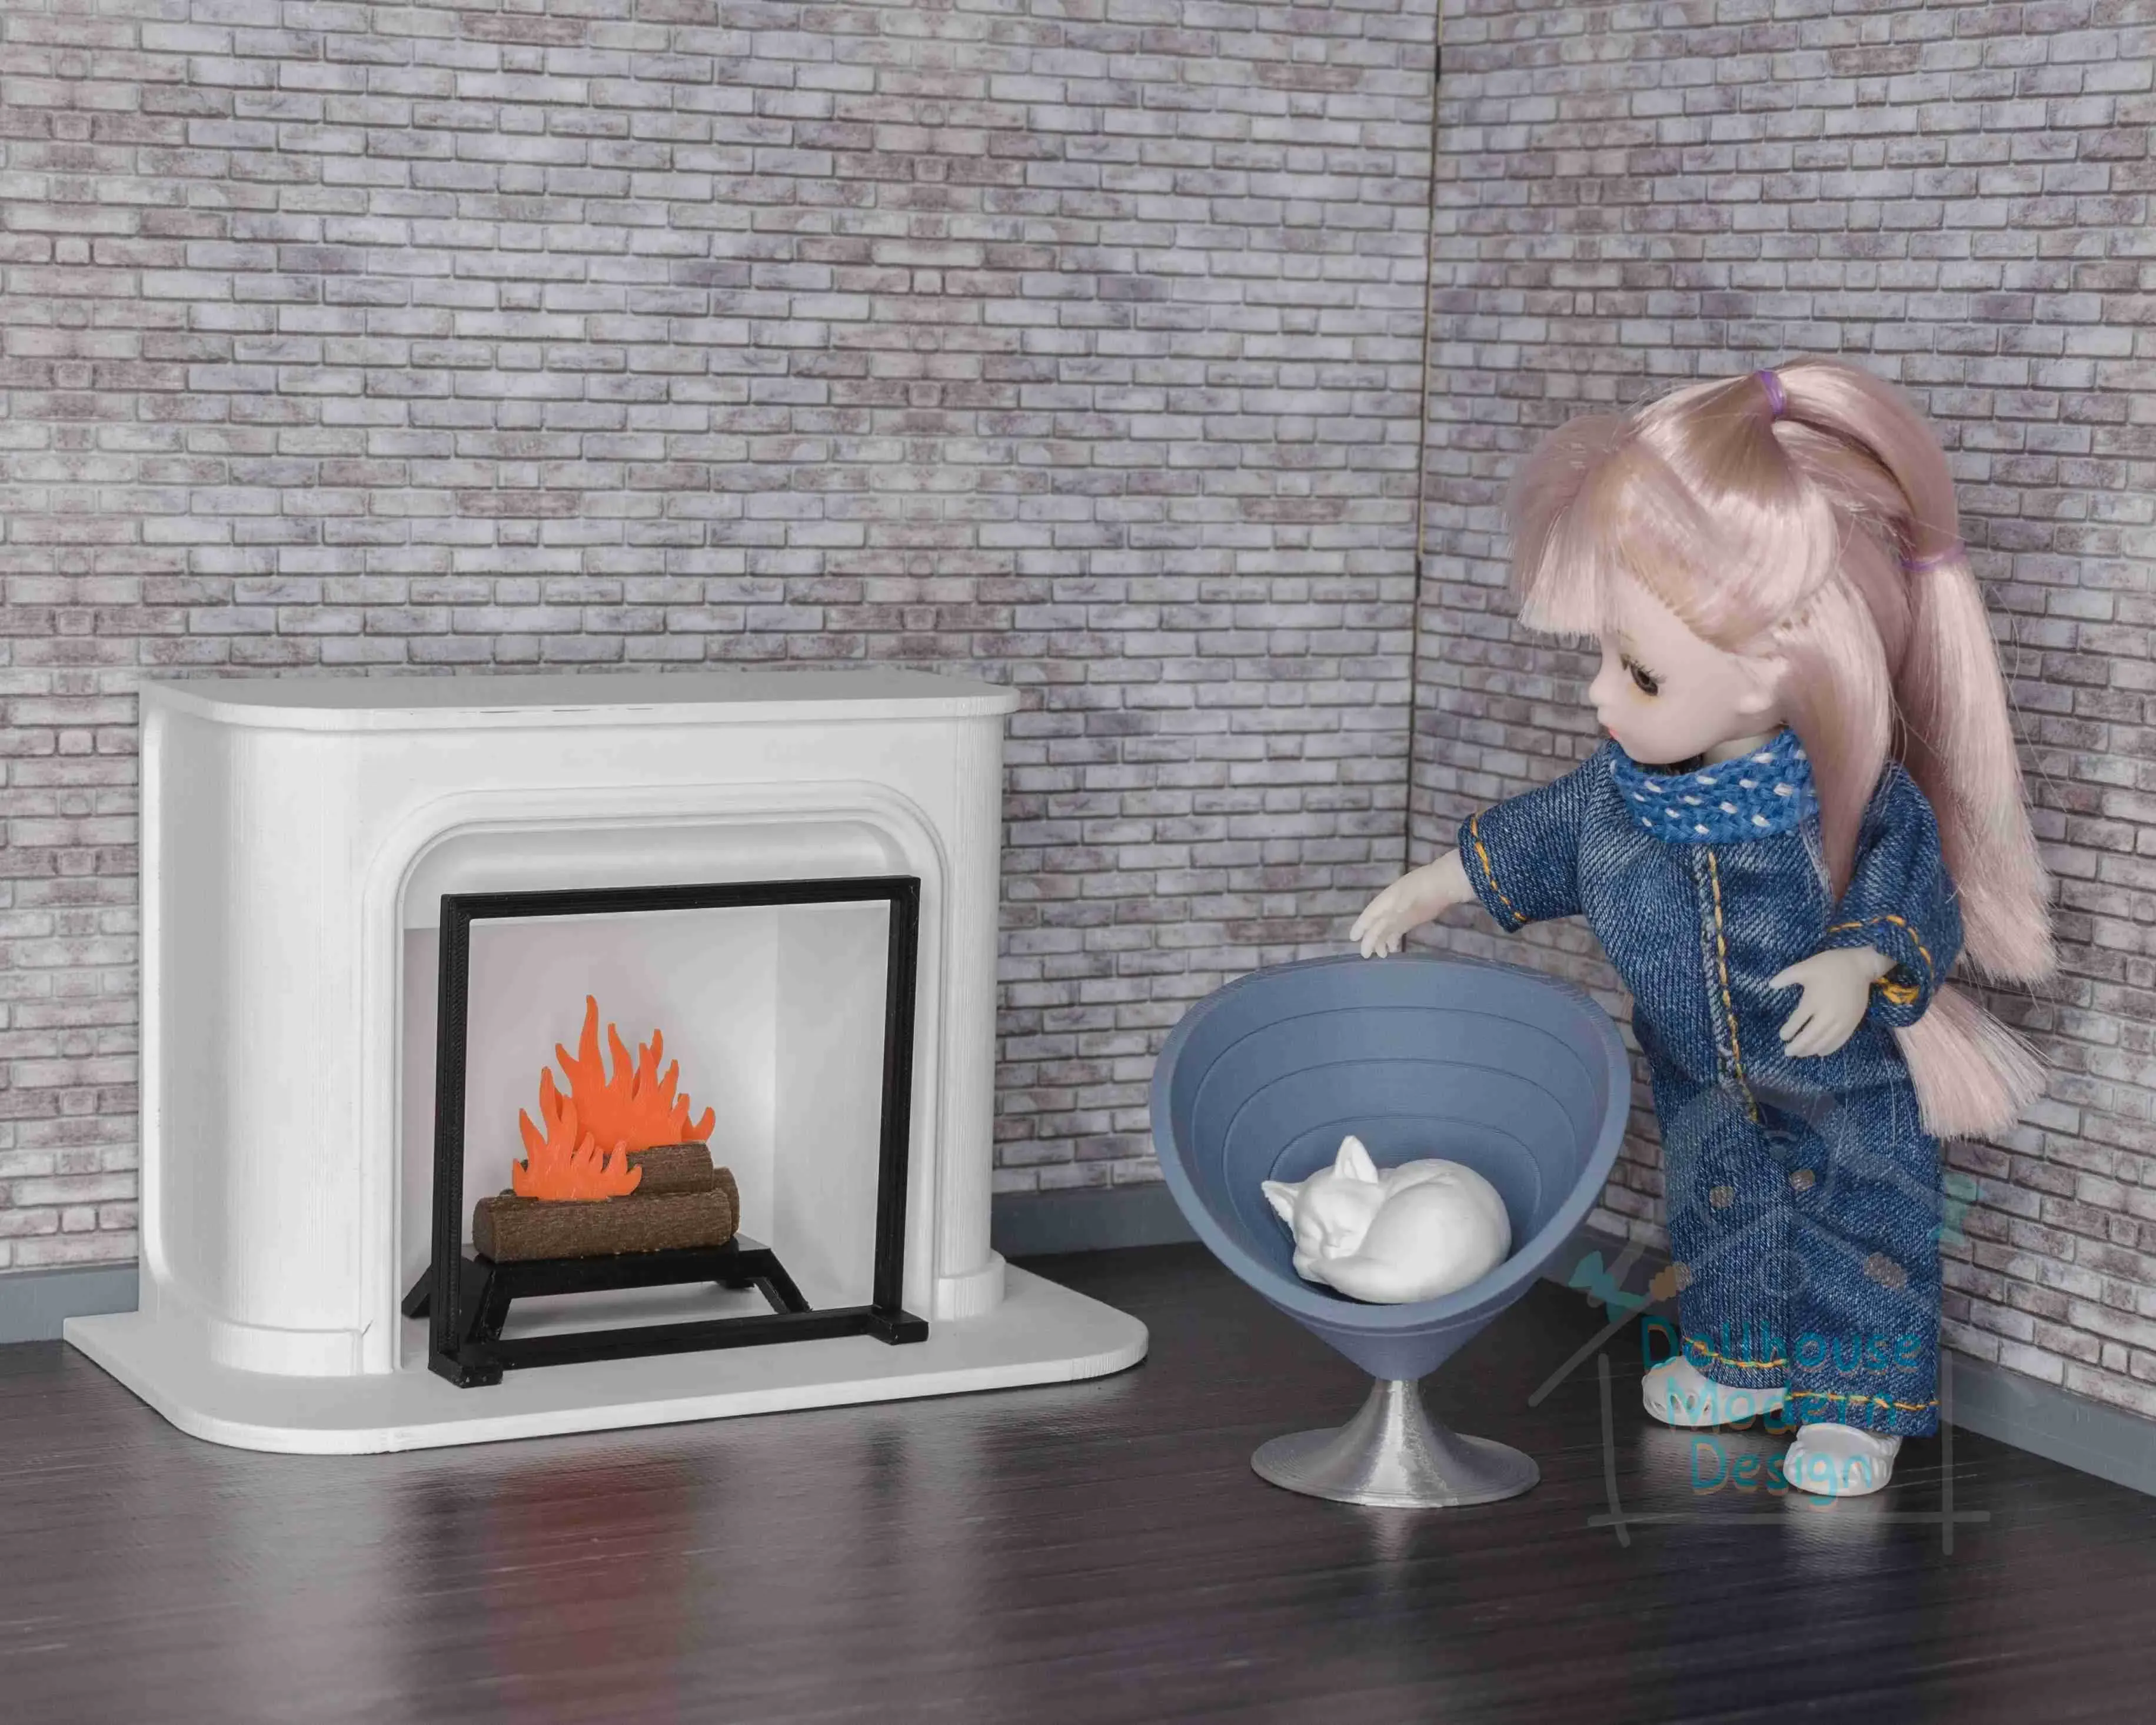 Modern Fireplace in 1:12 scale - dollhouse furniture